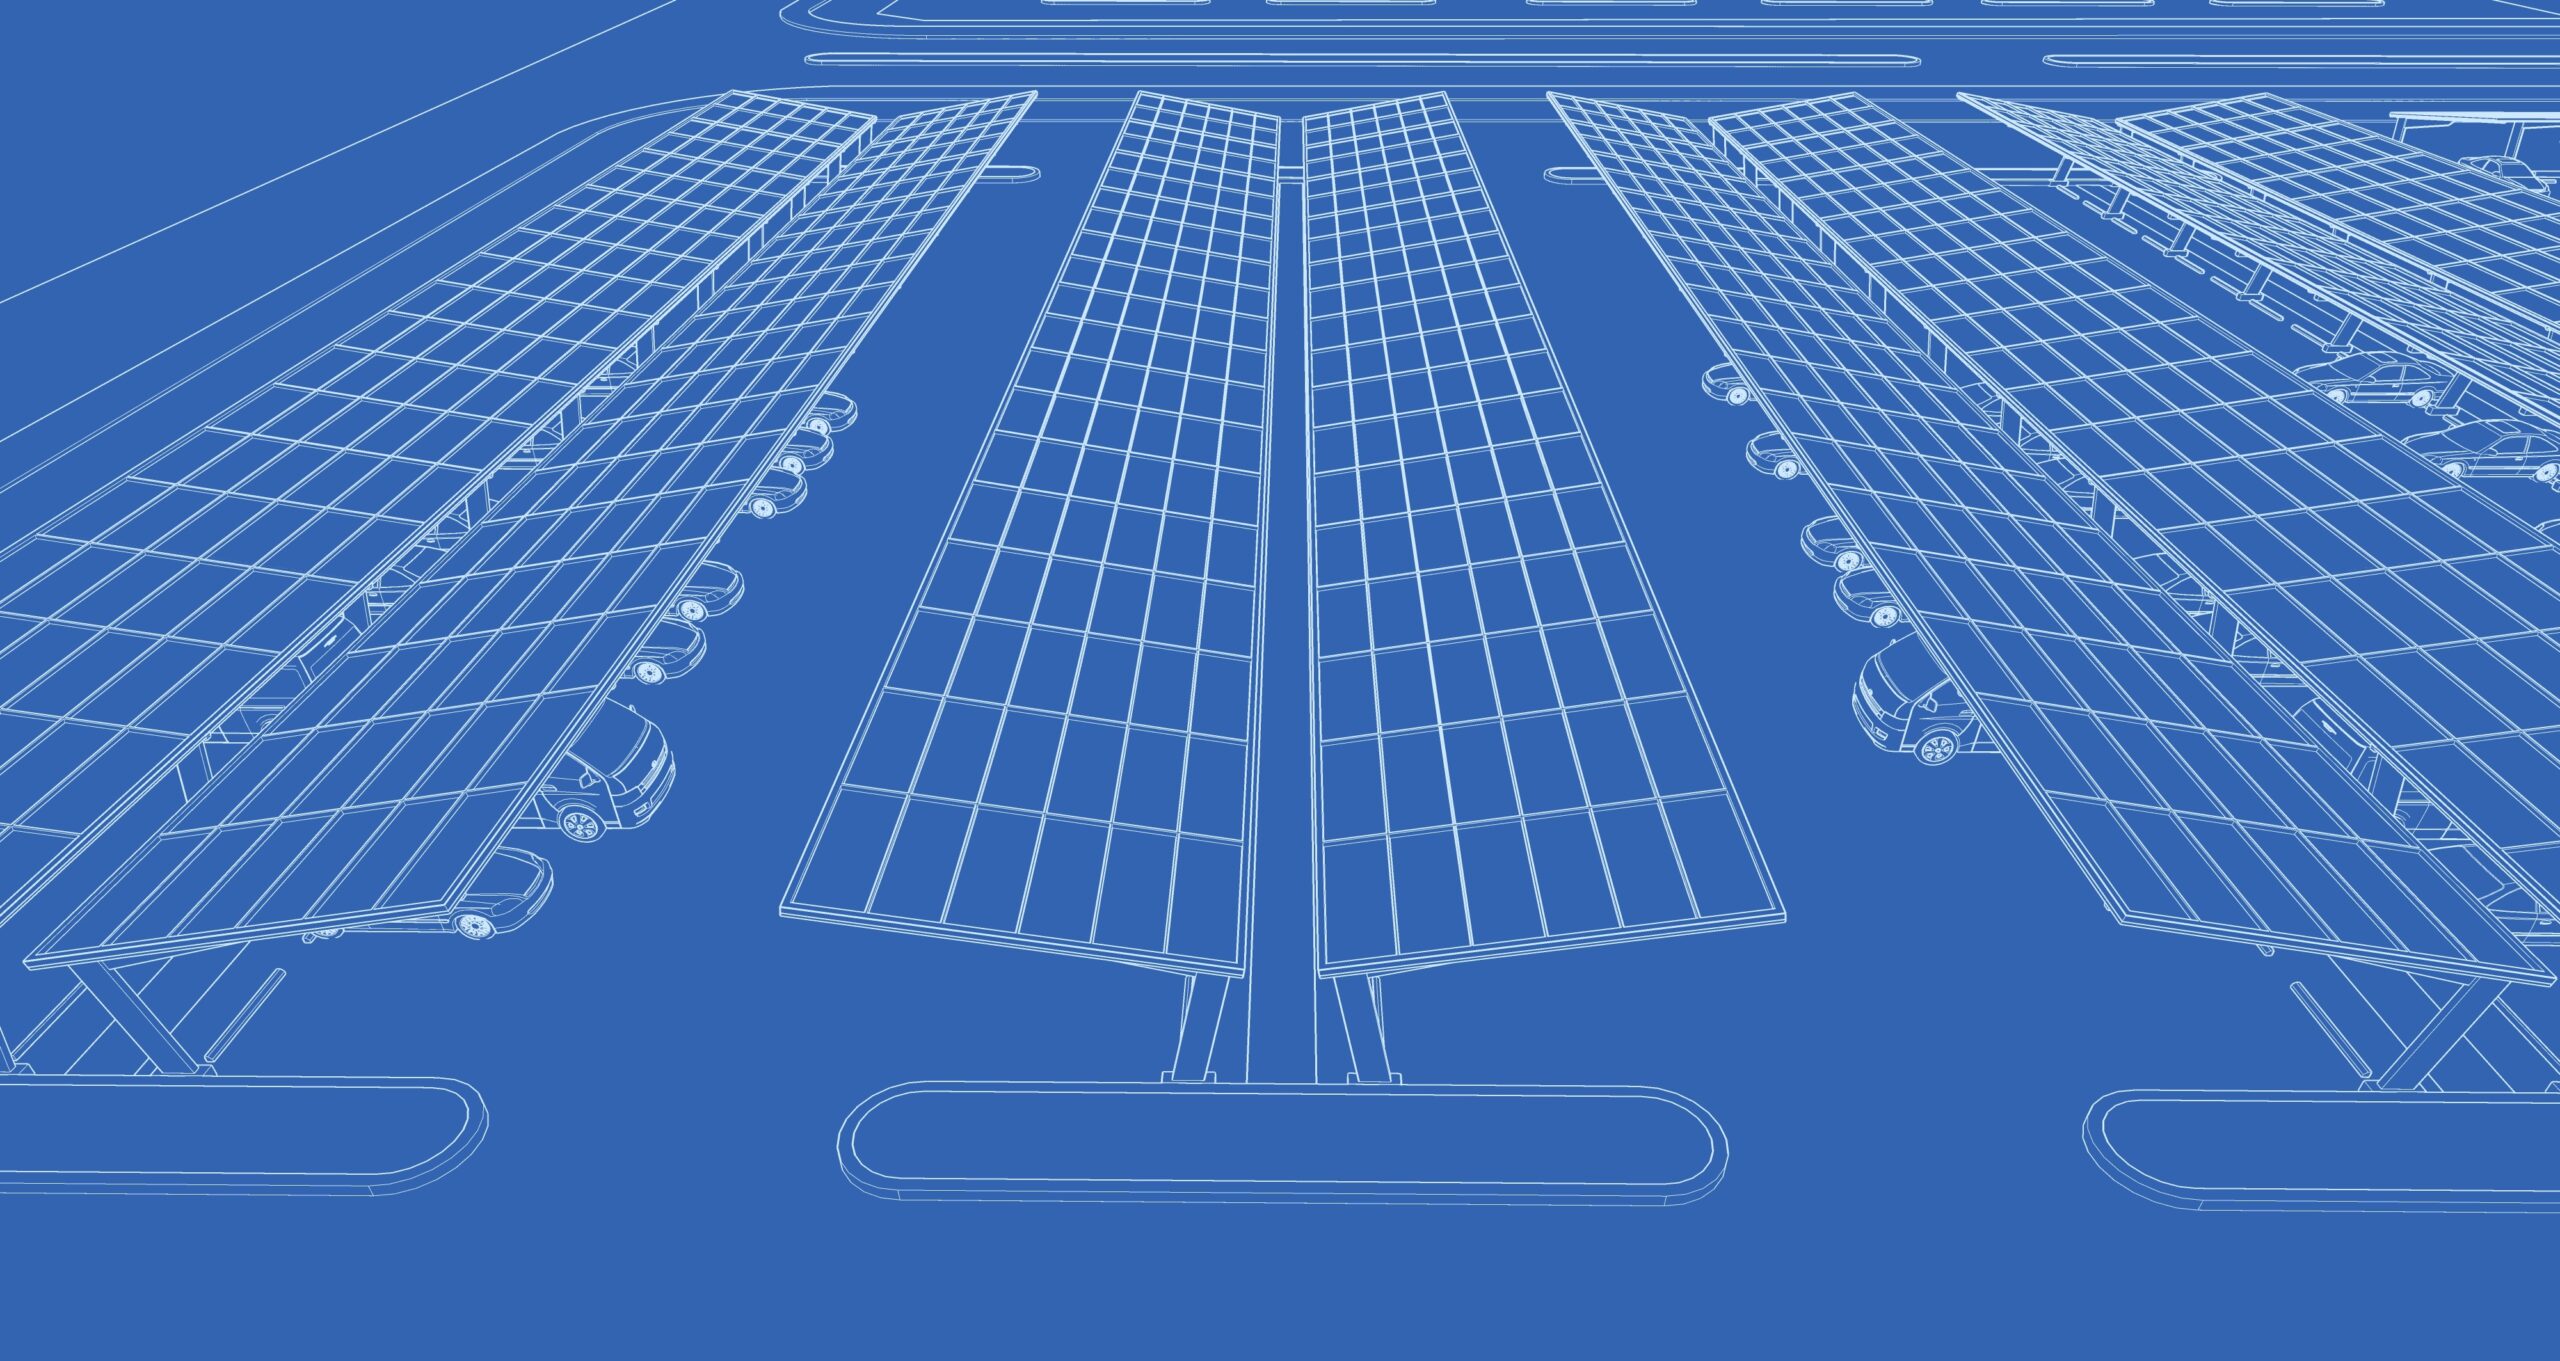 3D illustration and blueprint of a solar parking project